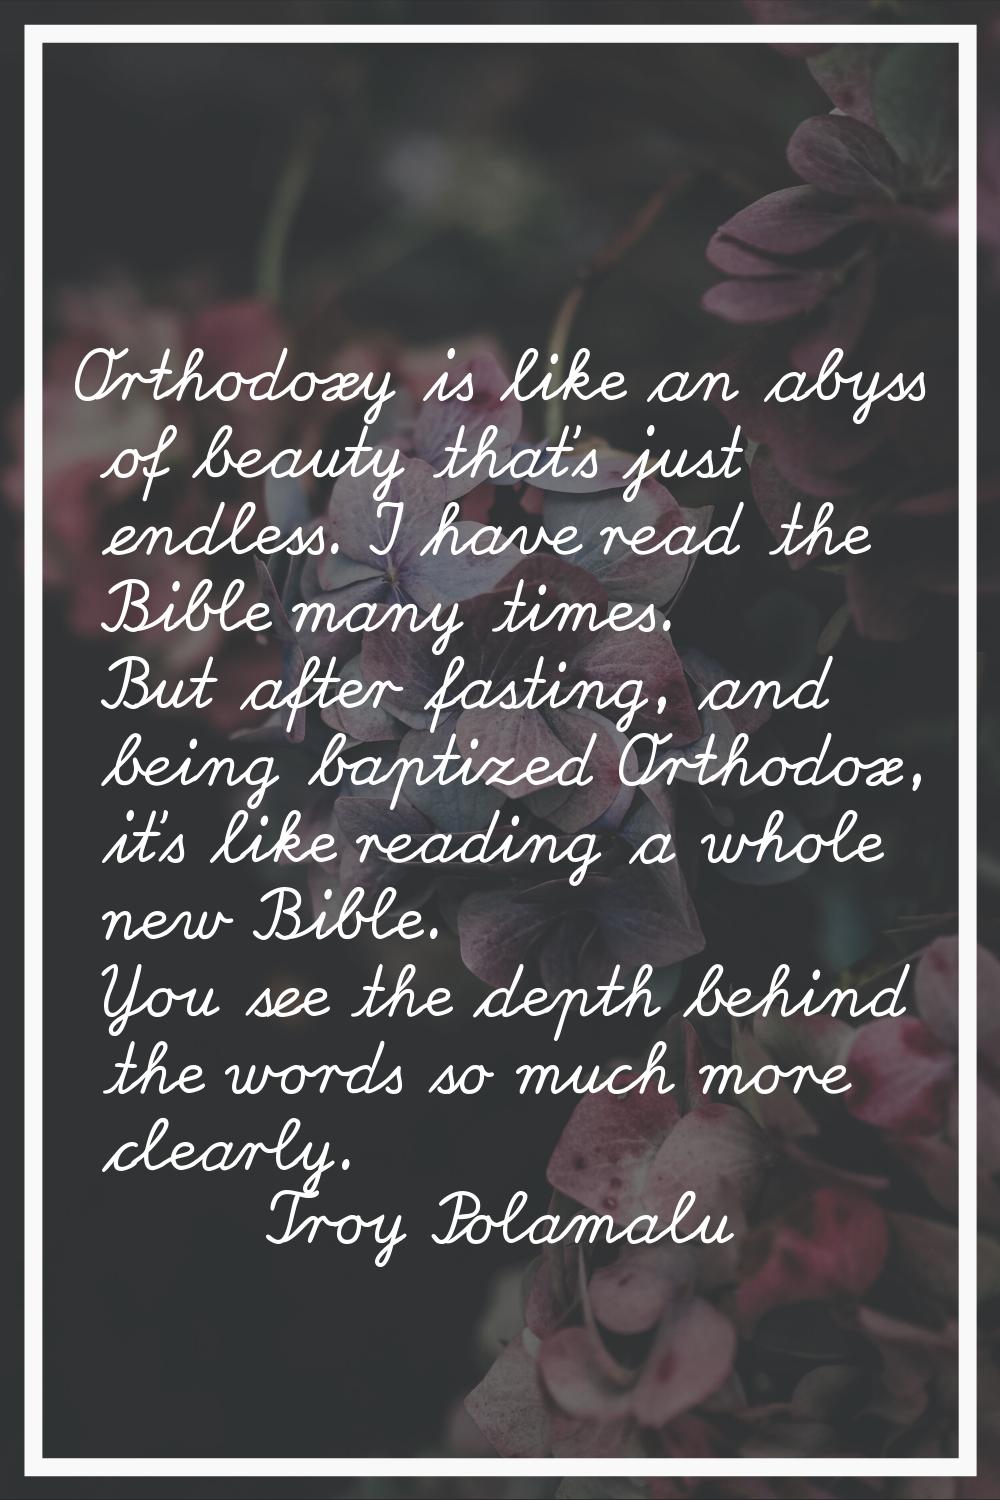 Orthodoxy is like an abyss of beauty that's just endless. I have read the Bible many times. But aft